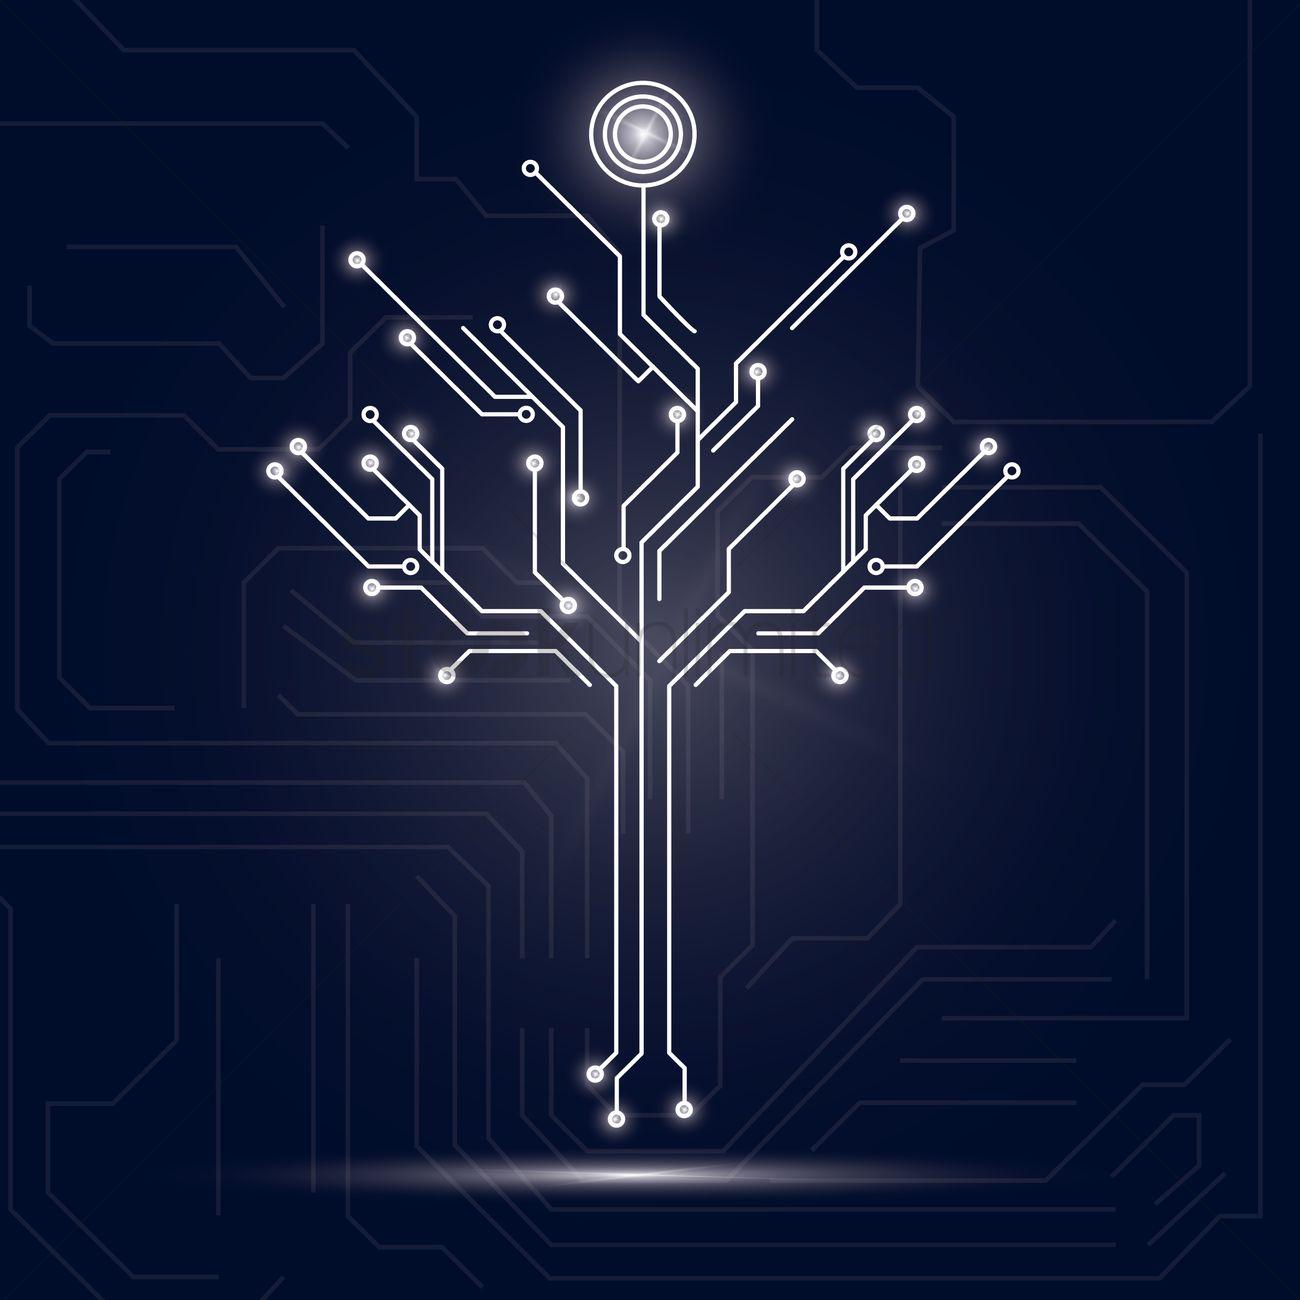 Tree design on circuit board background Vector Image